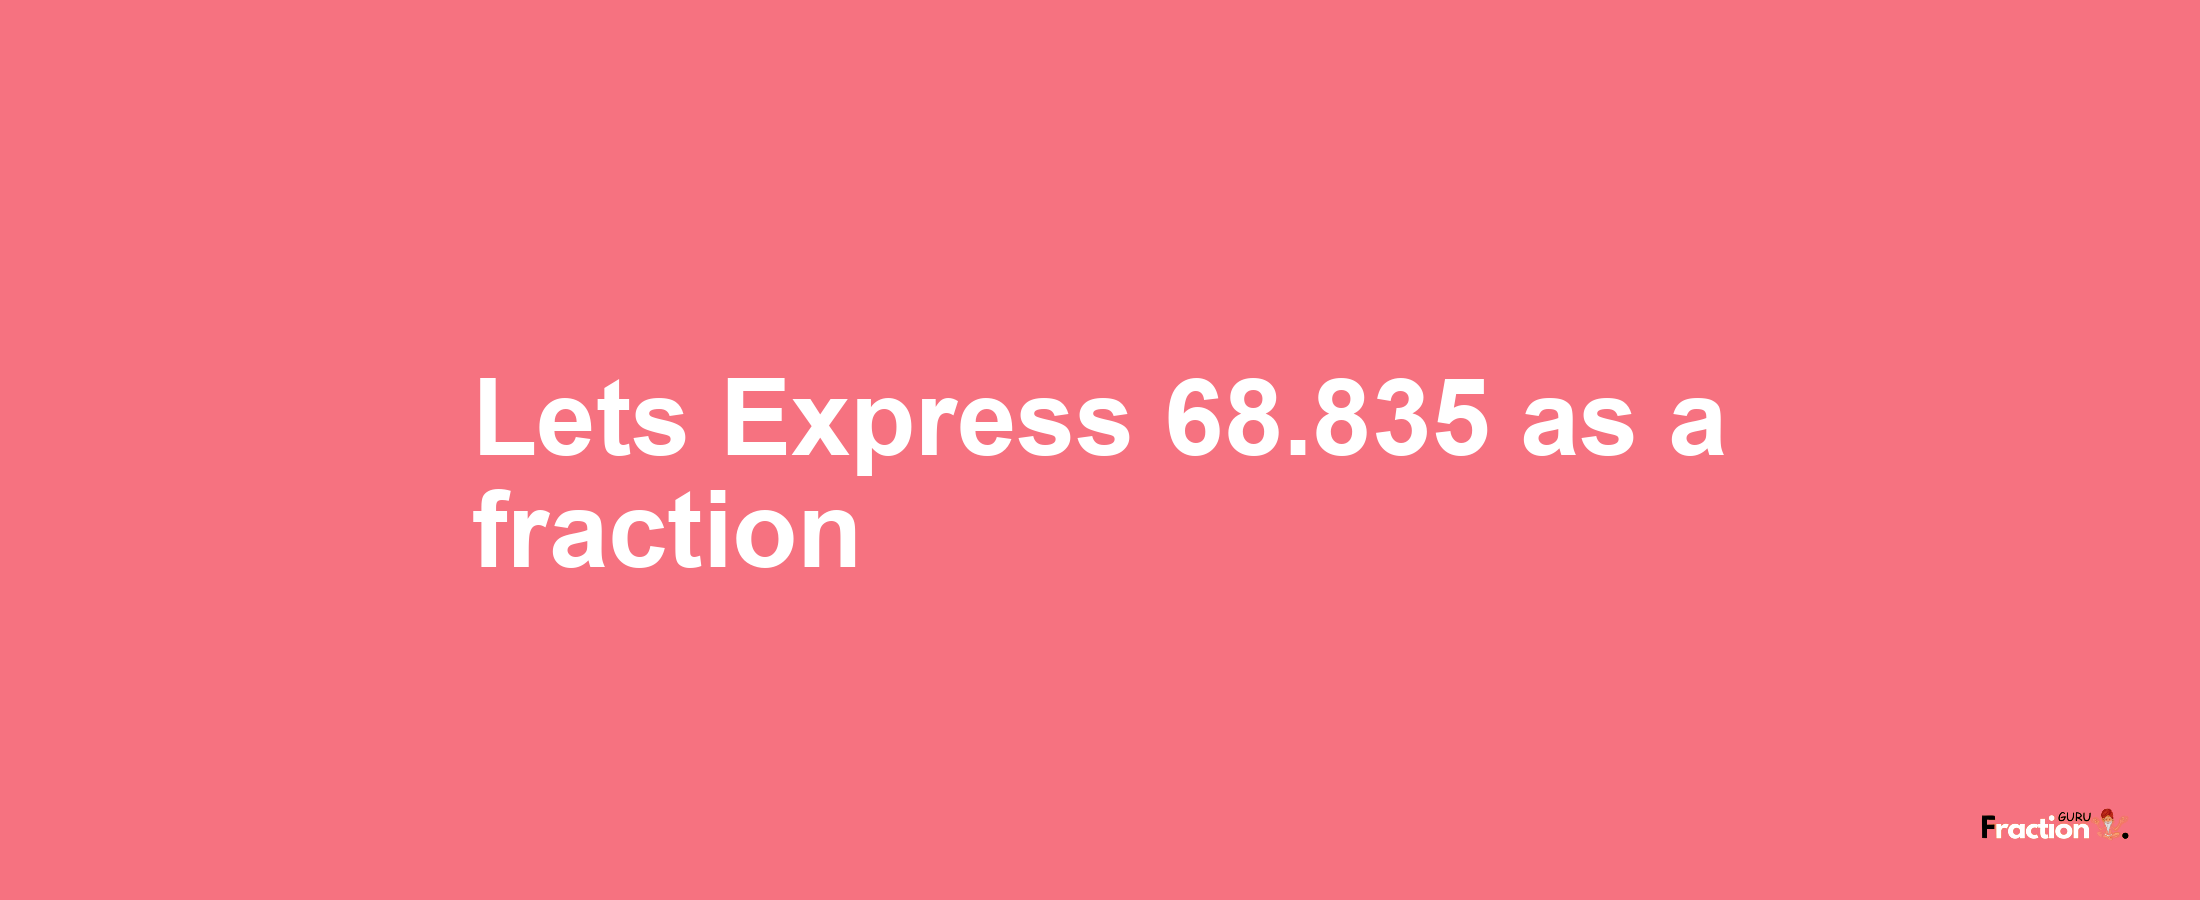 Lets Express 68.835 as afraction